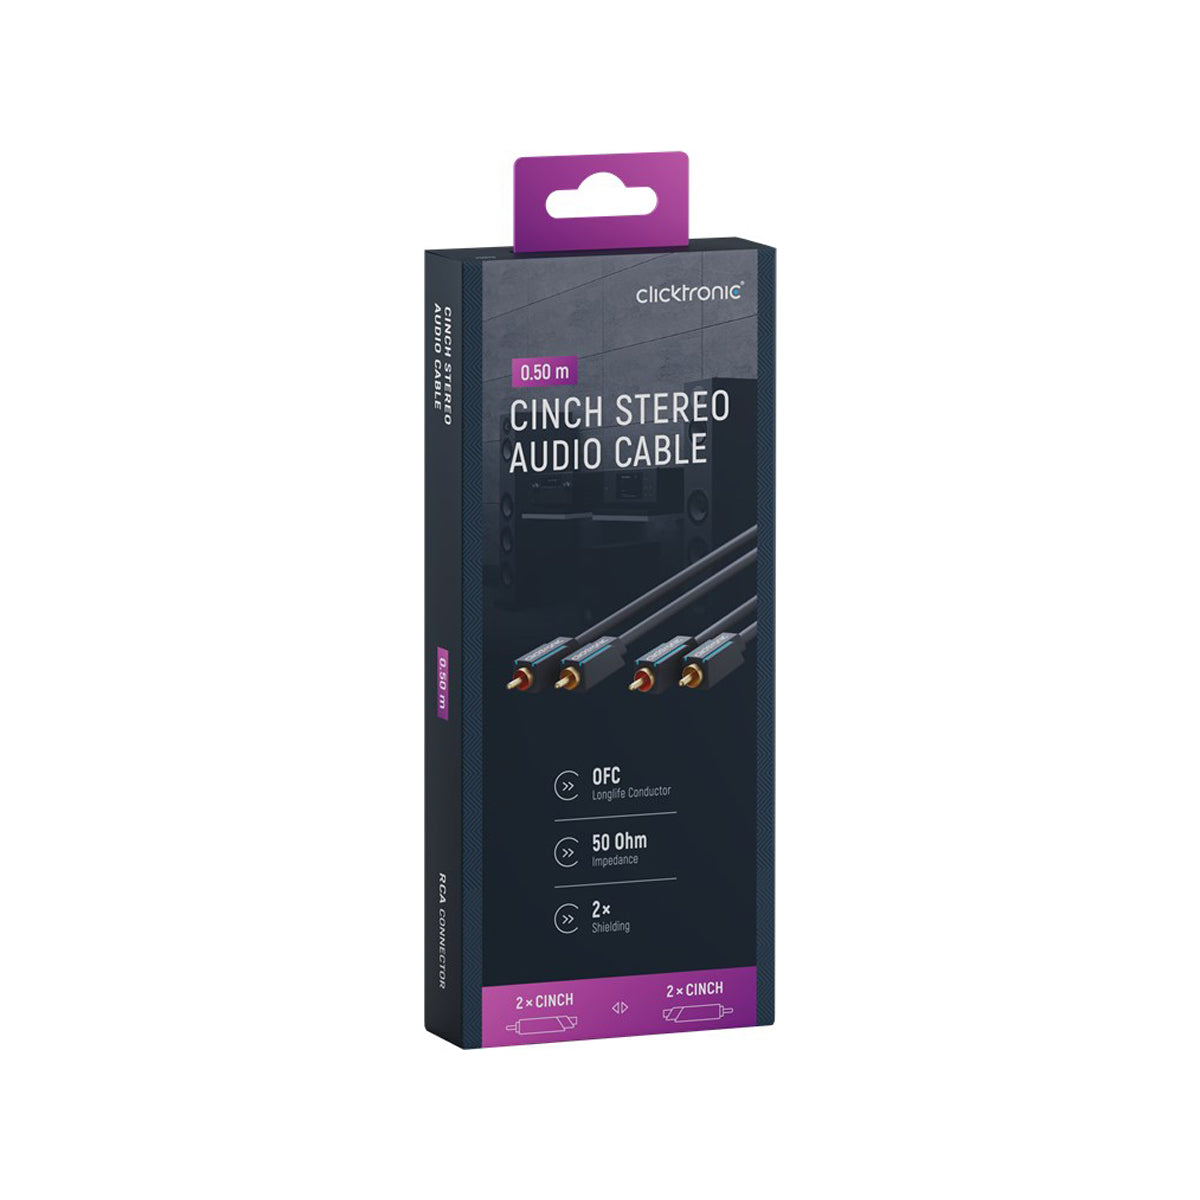 Clicktronic Cinch Stereo RCA Cable - 0.5m